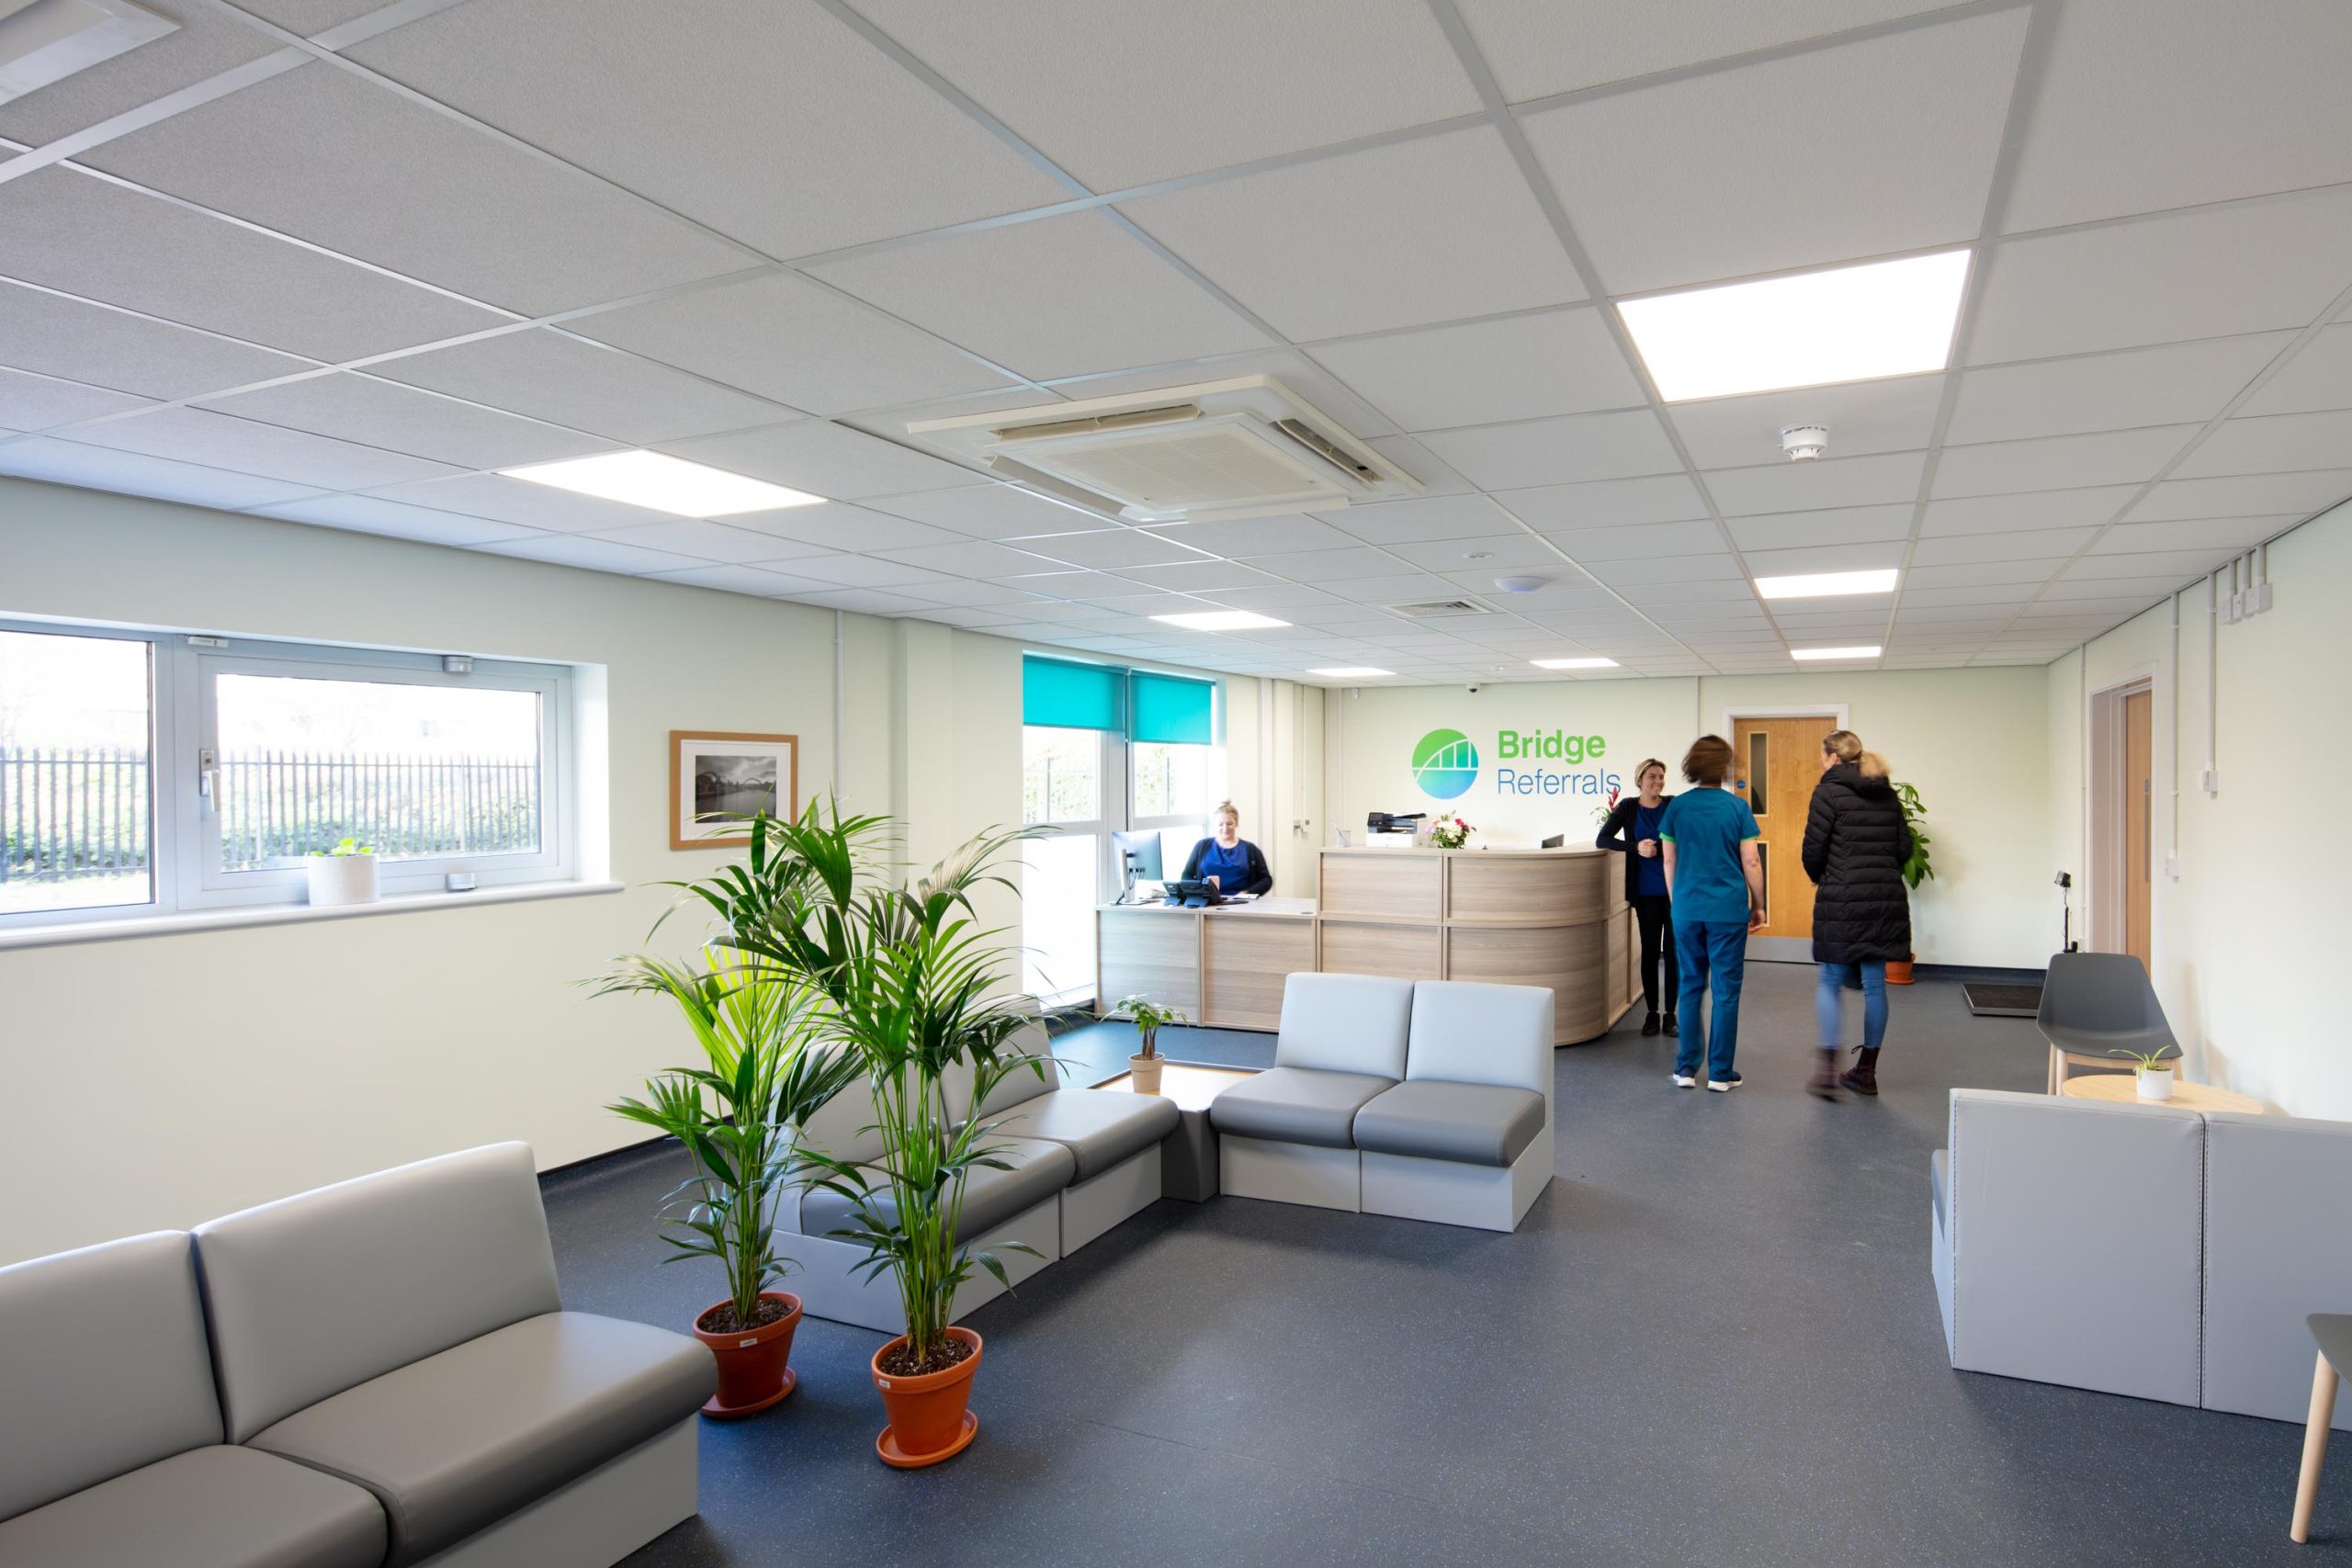 Our brand new multidisciplinary veterinary referral centre is now open!!!